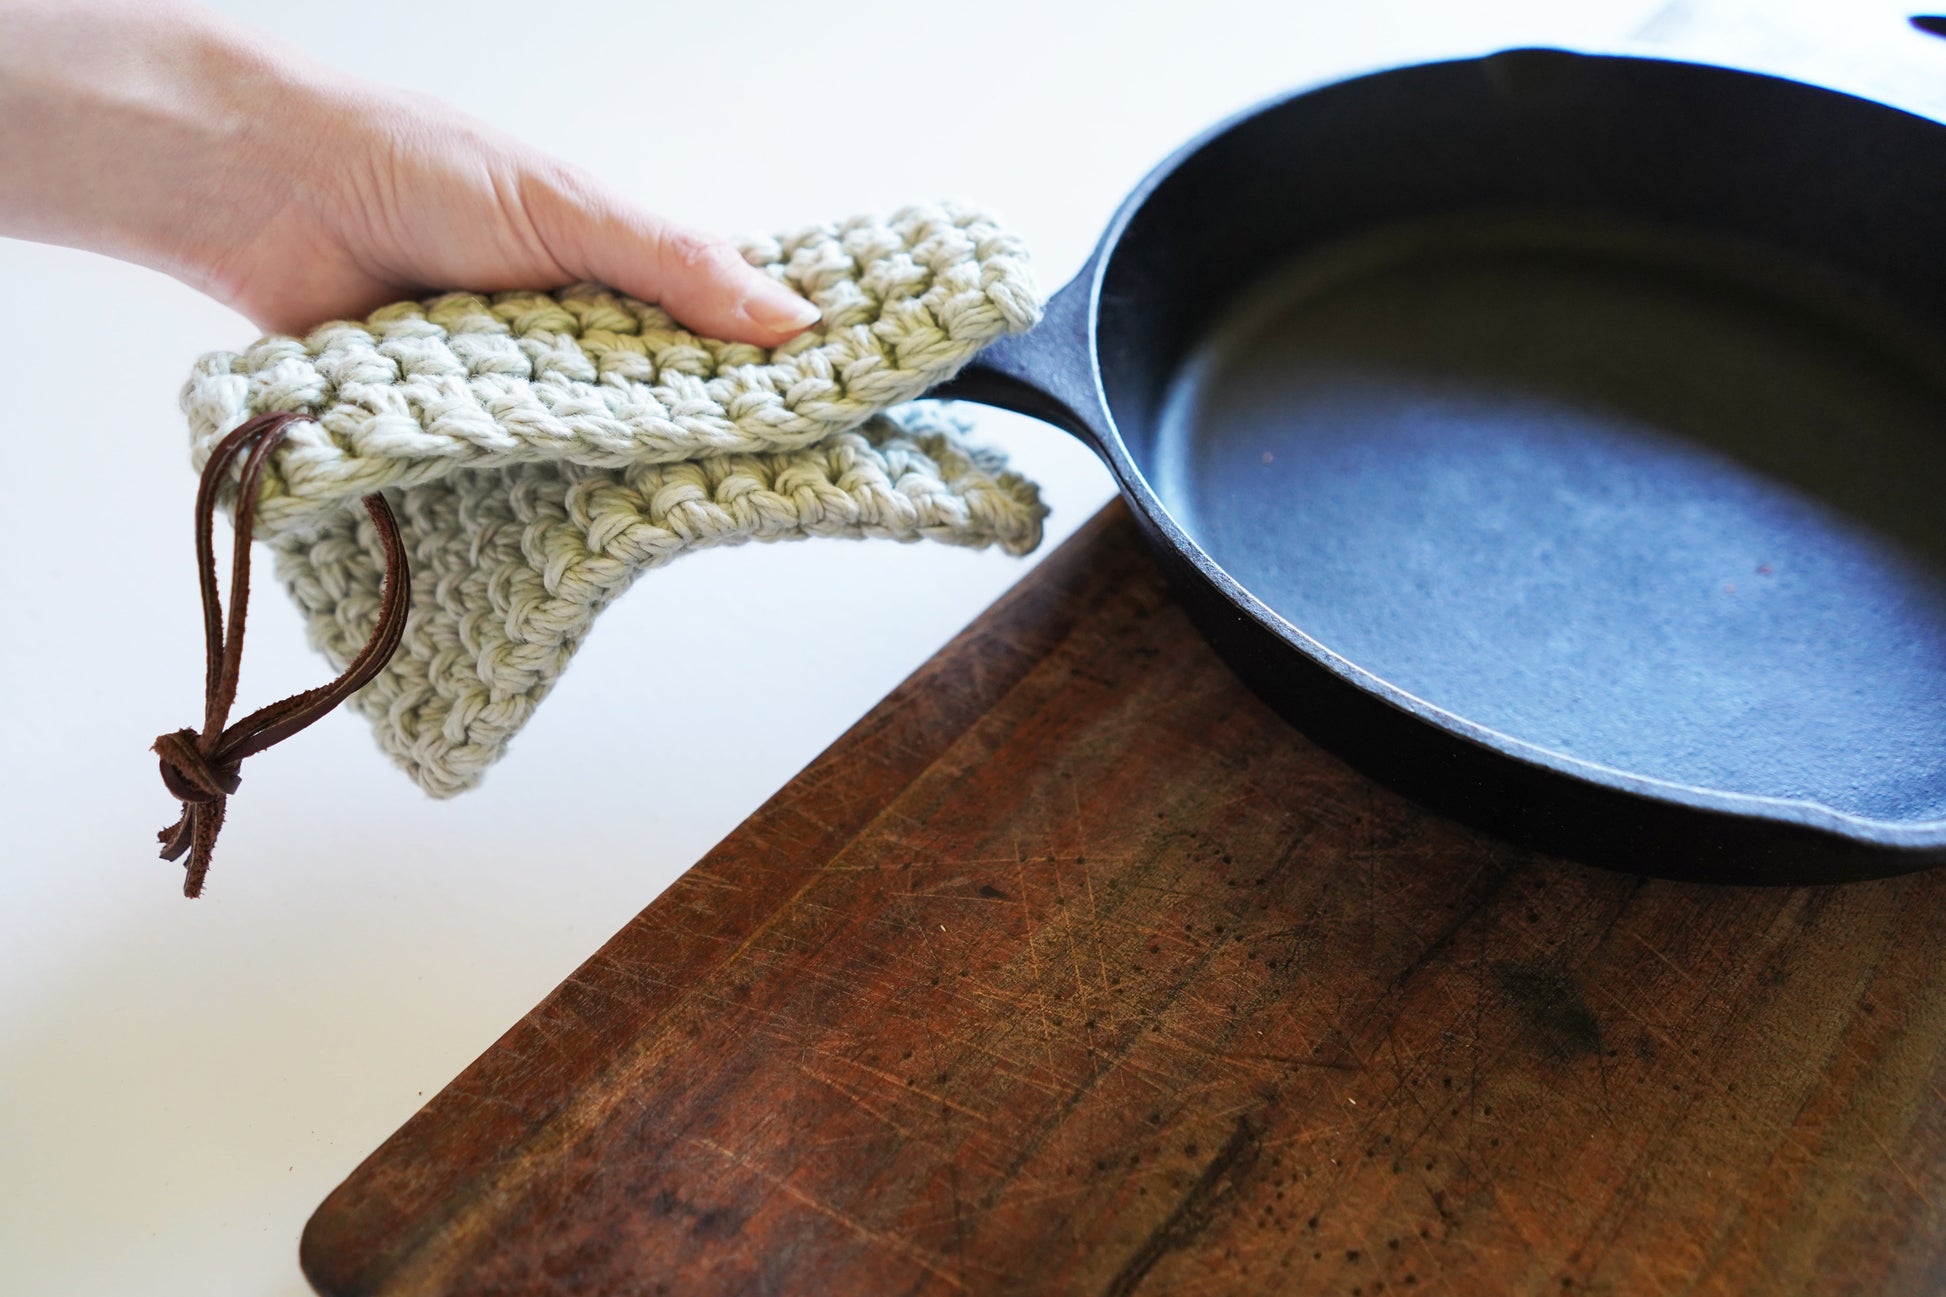 How to Sew a Skillet Handle Potholder 